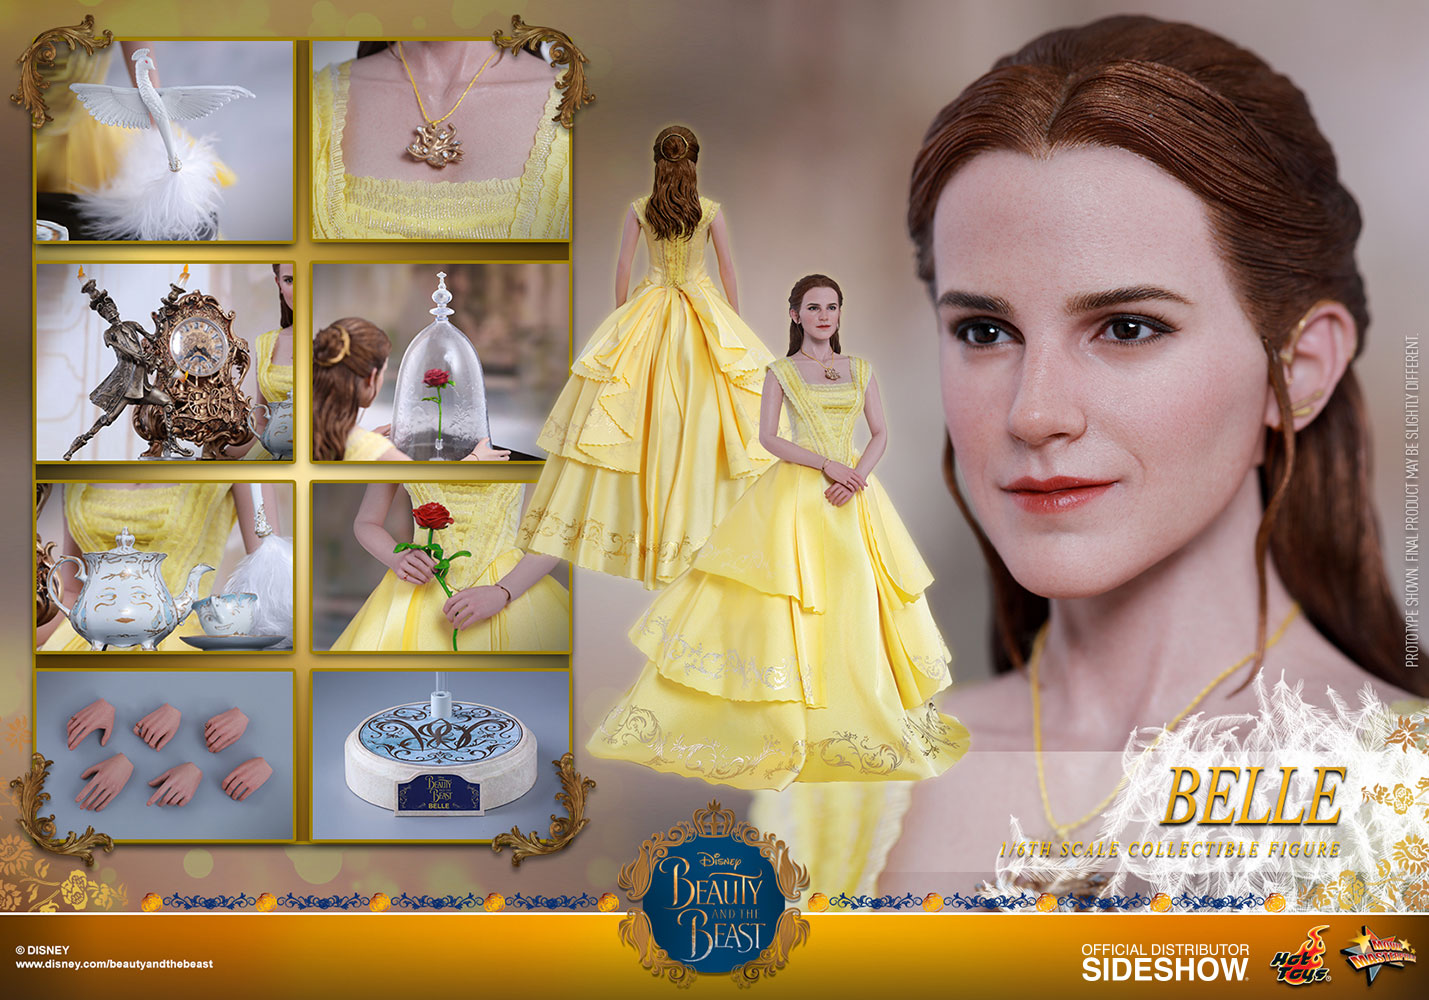 1/6 Emma Watson Head Sculpt Beauty and the Beast For 12" Hot Toys Phicen Figure 